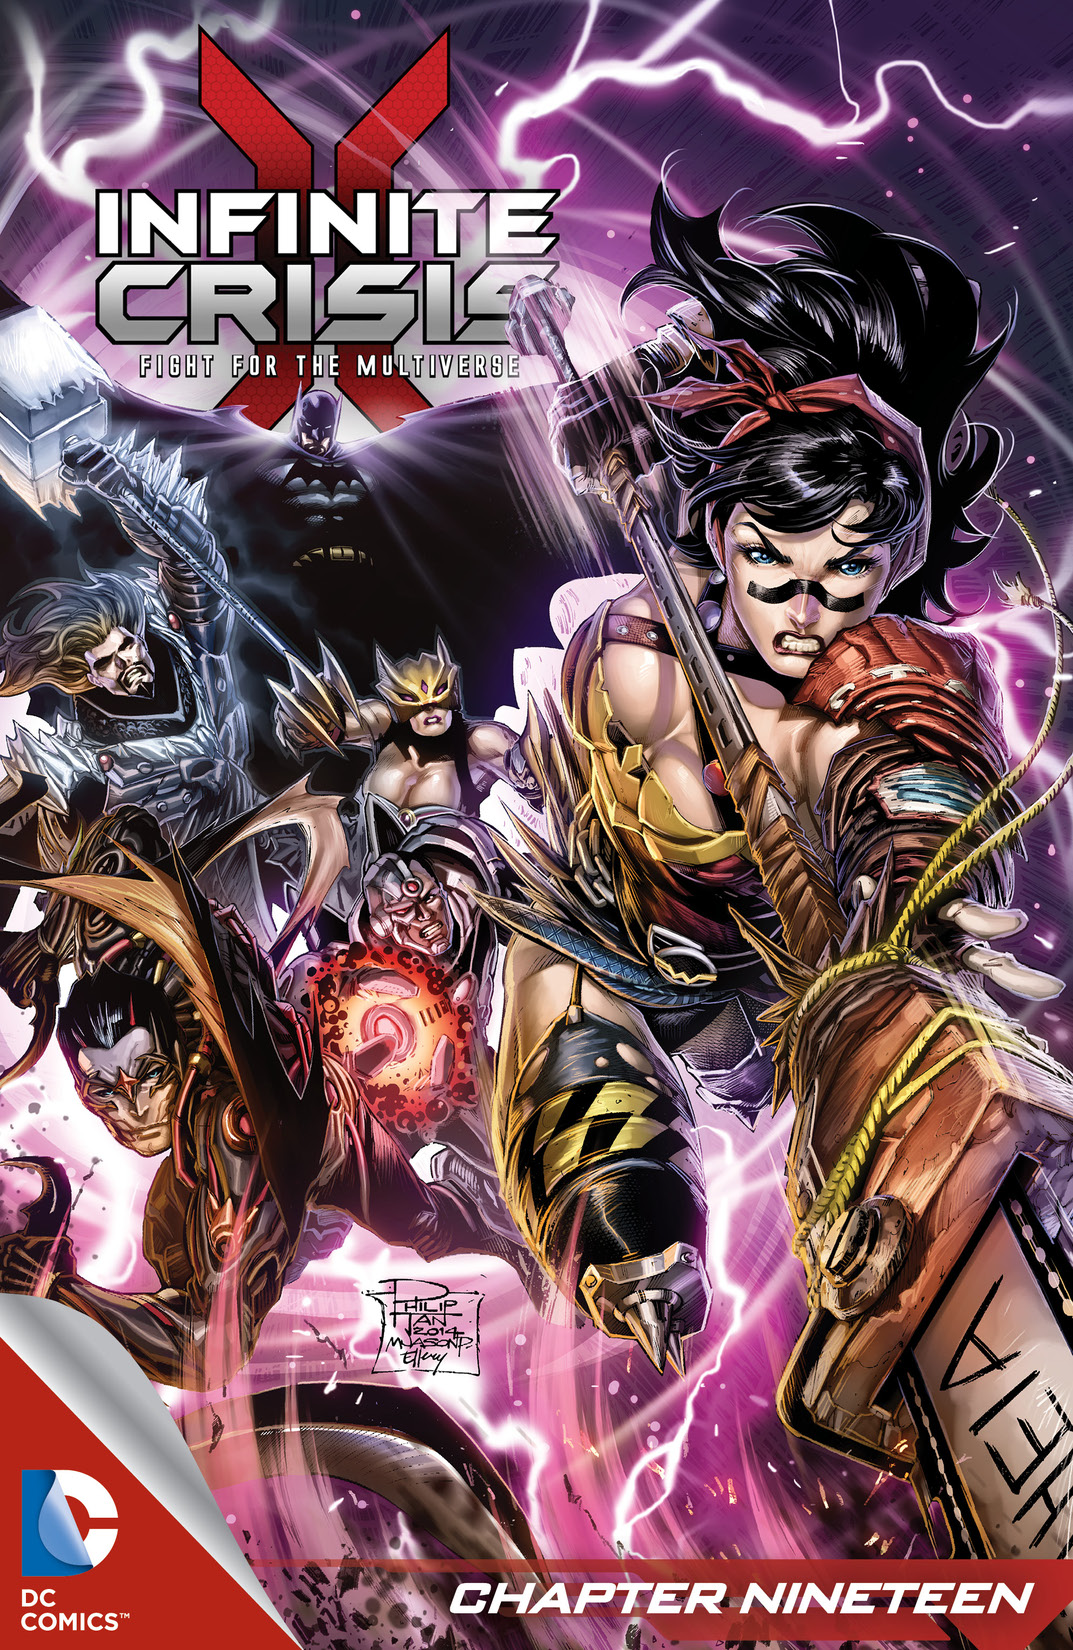 Infinite Crisis: Fight for the Multiverse #19 preview images